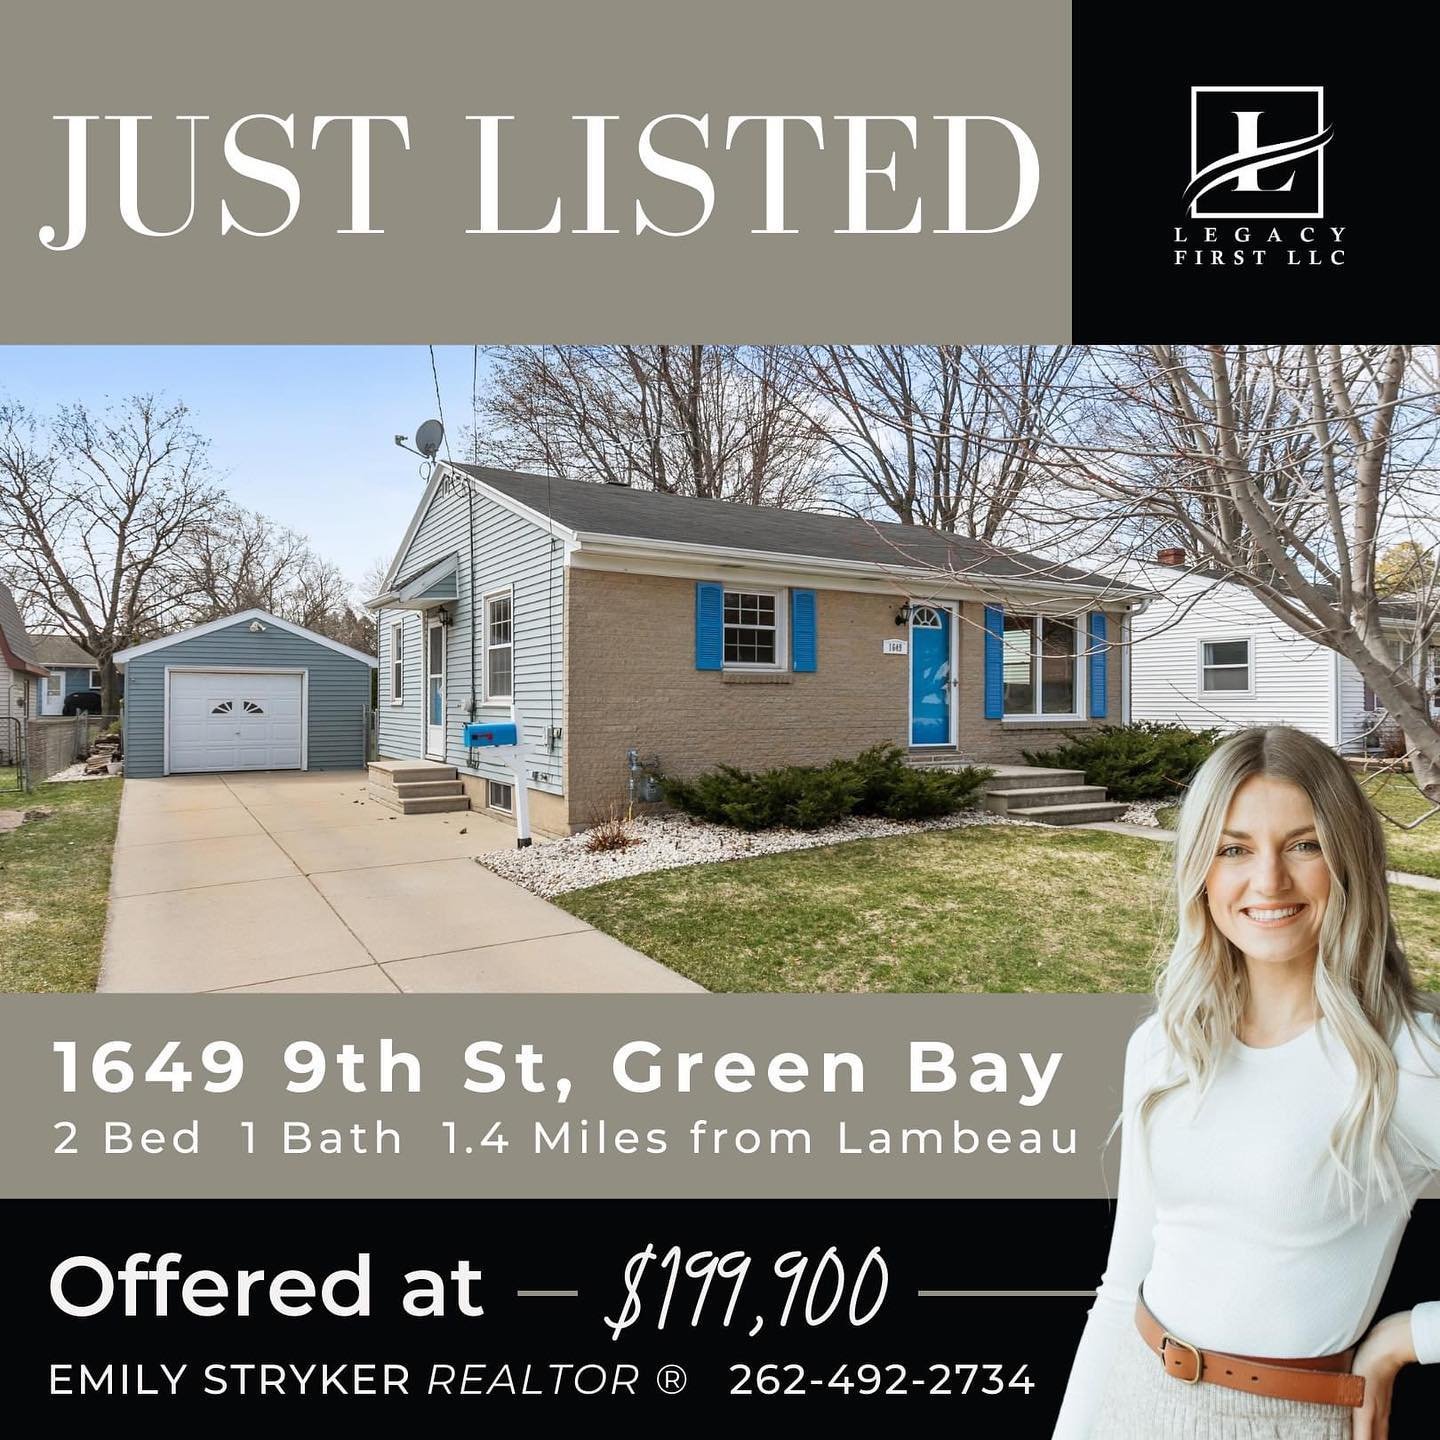 ✨ [ N  E W  L I S T I N G ] ✨
🏡 1649 9th St, Green Bay
👉🏻 Offered at $199,900

Welcome to this well-maintained ranch home located just 1.4 miles from Lambeau Field on Green Bay&rsquo;s West Side. This 2-bedroom, 1-bathroom residence is in immacula